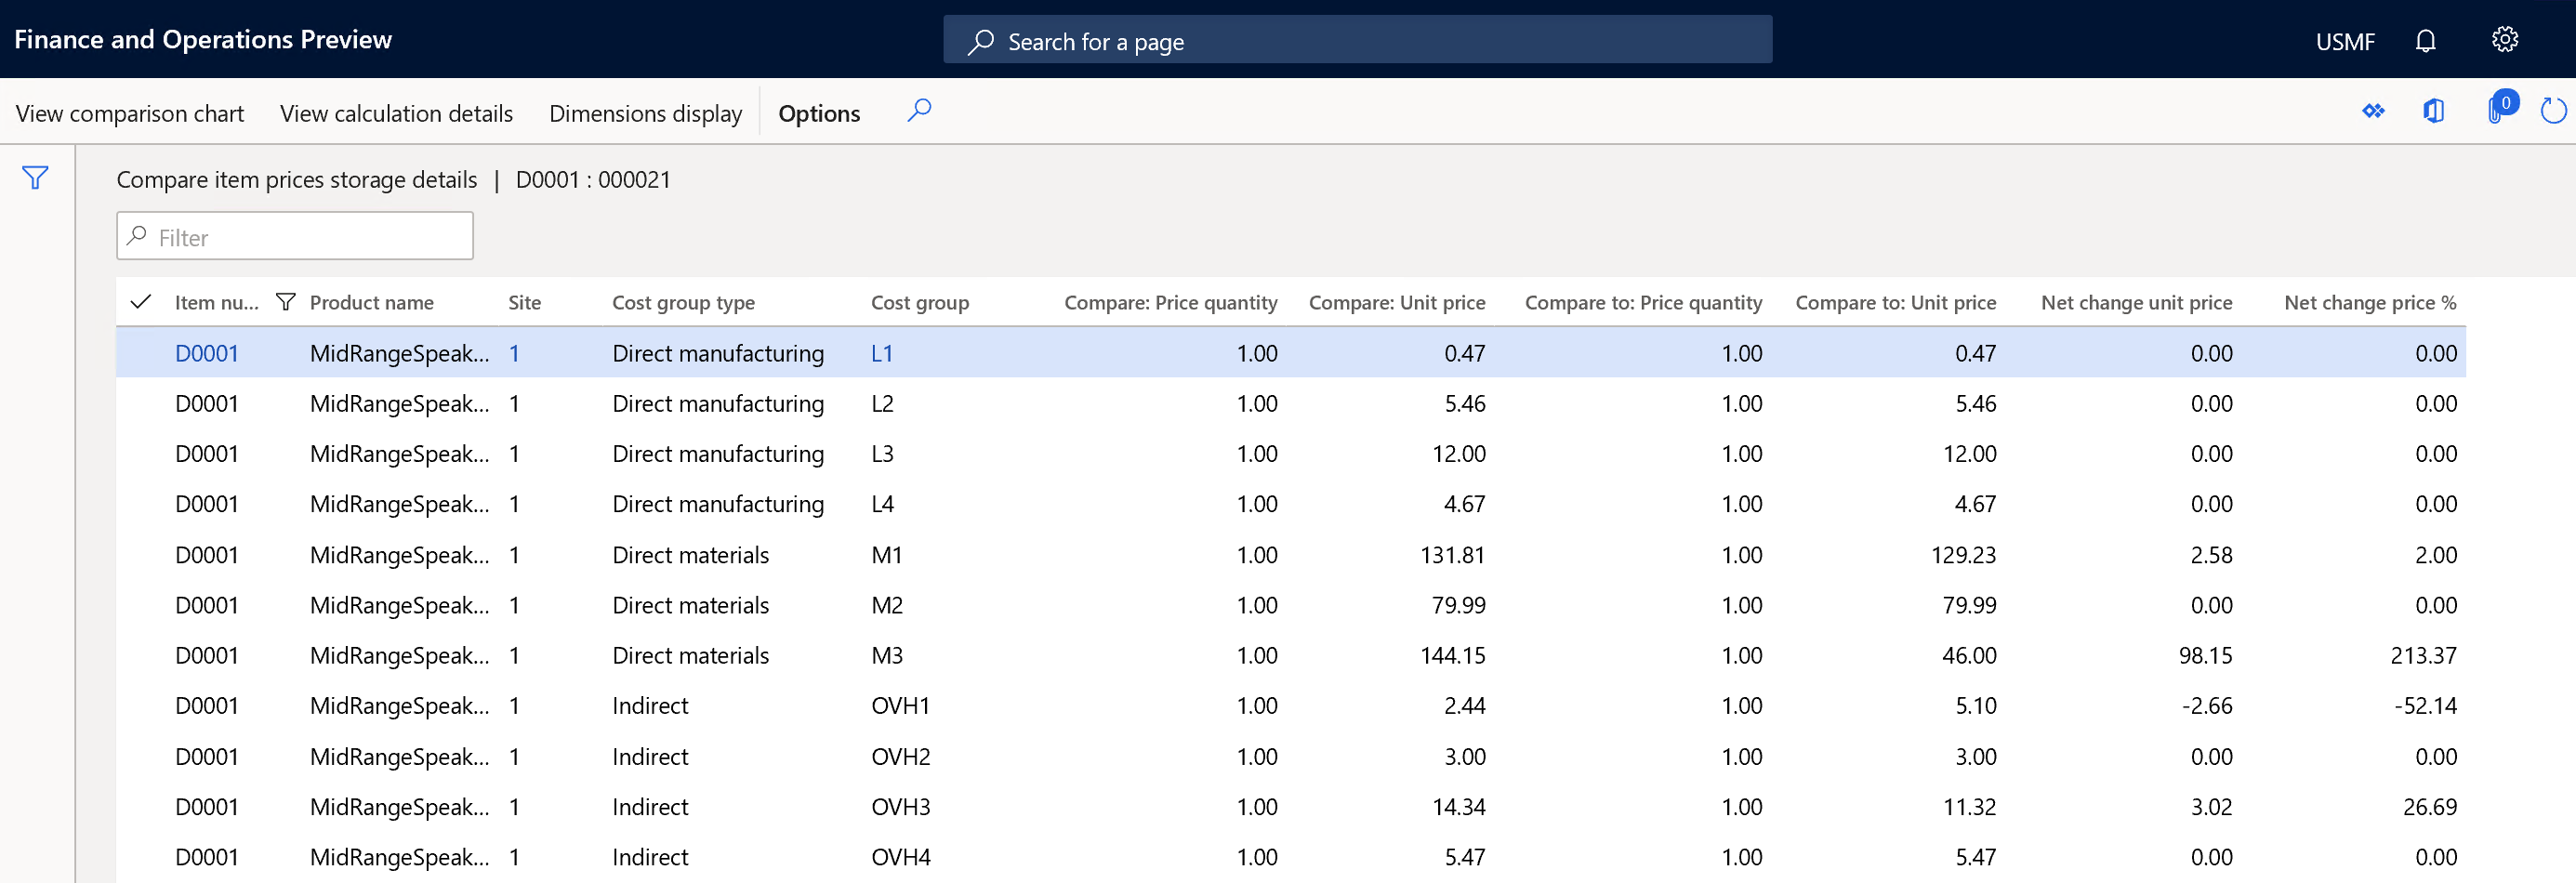 Compare item prices storage details filtered by item with a breakdown by Cost group